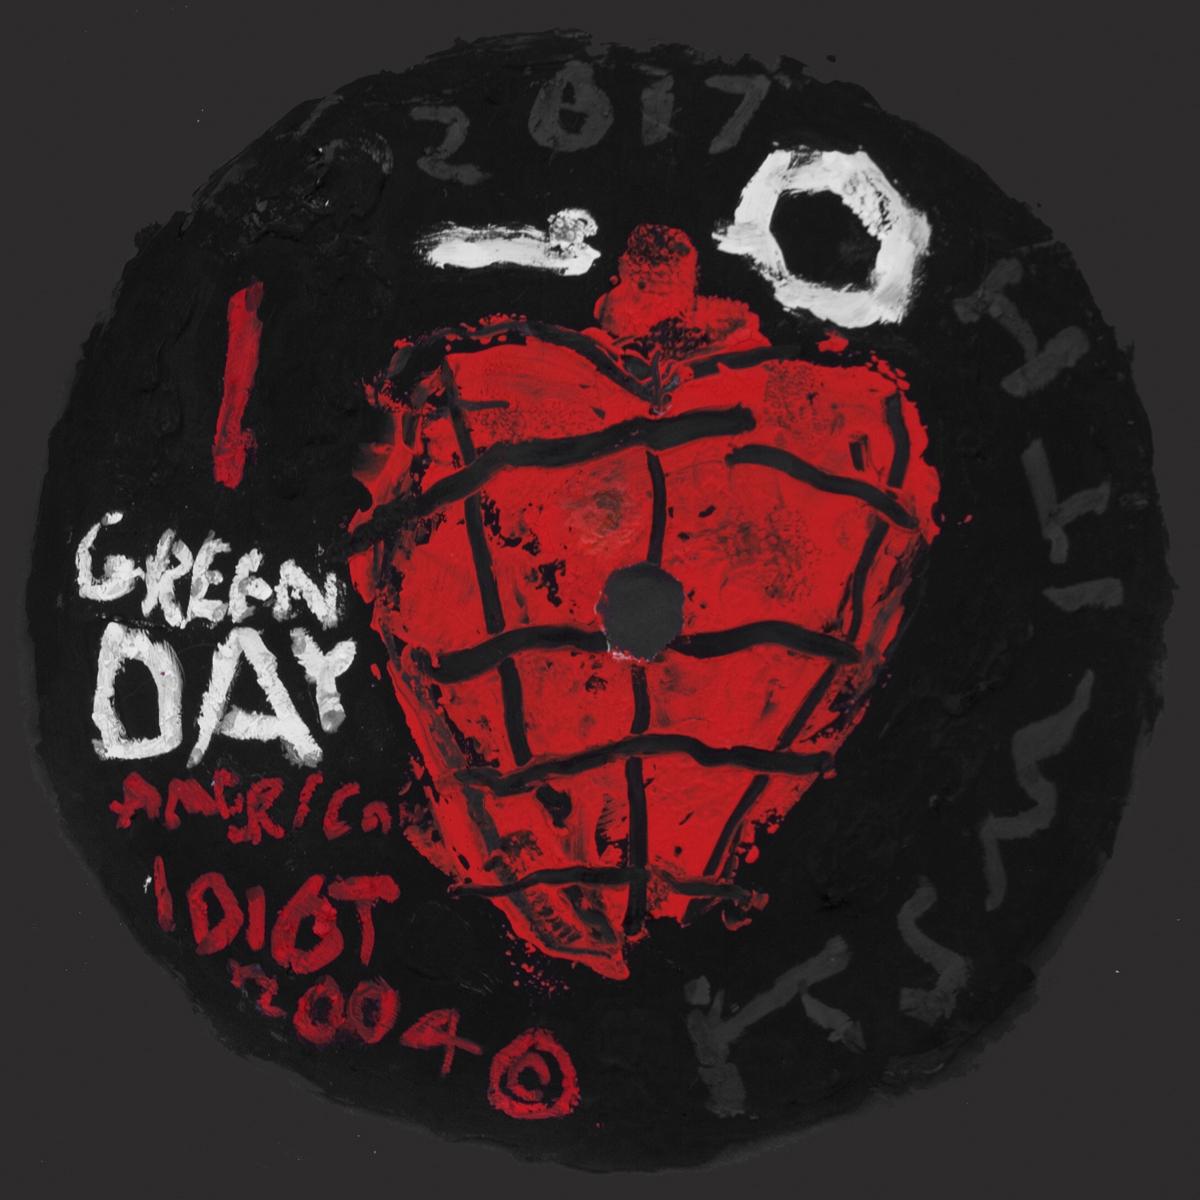 Kerry Smith Abstract Painting - Green Day - American Idiot (Record Label, Pop Art, Setlists, Grammy)